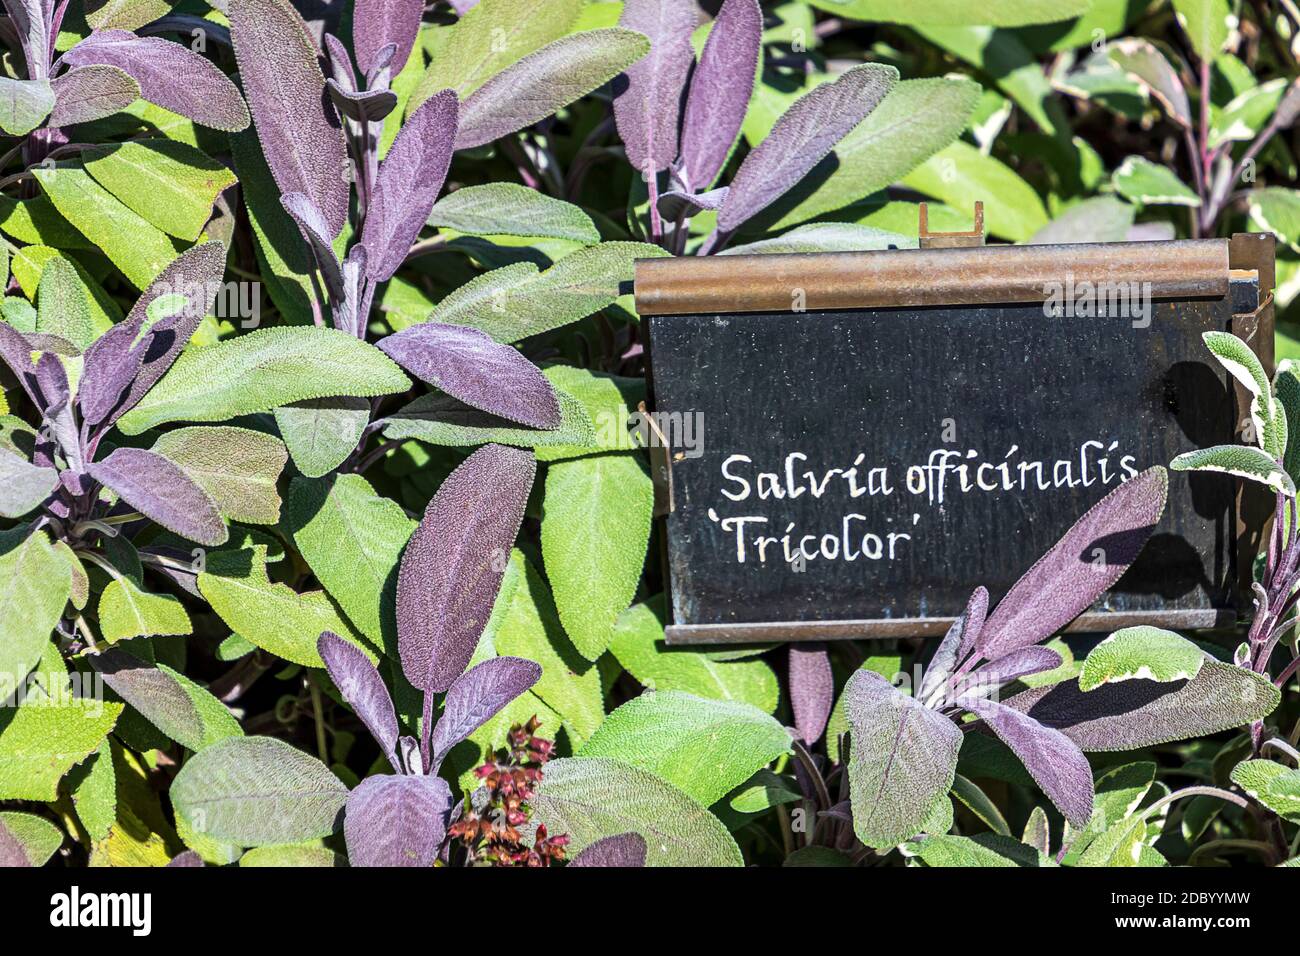 Culinary herb background - Salvia officinalis â€˜Tricolorâ€™ Sage Stock Photo